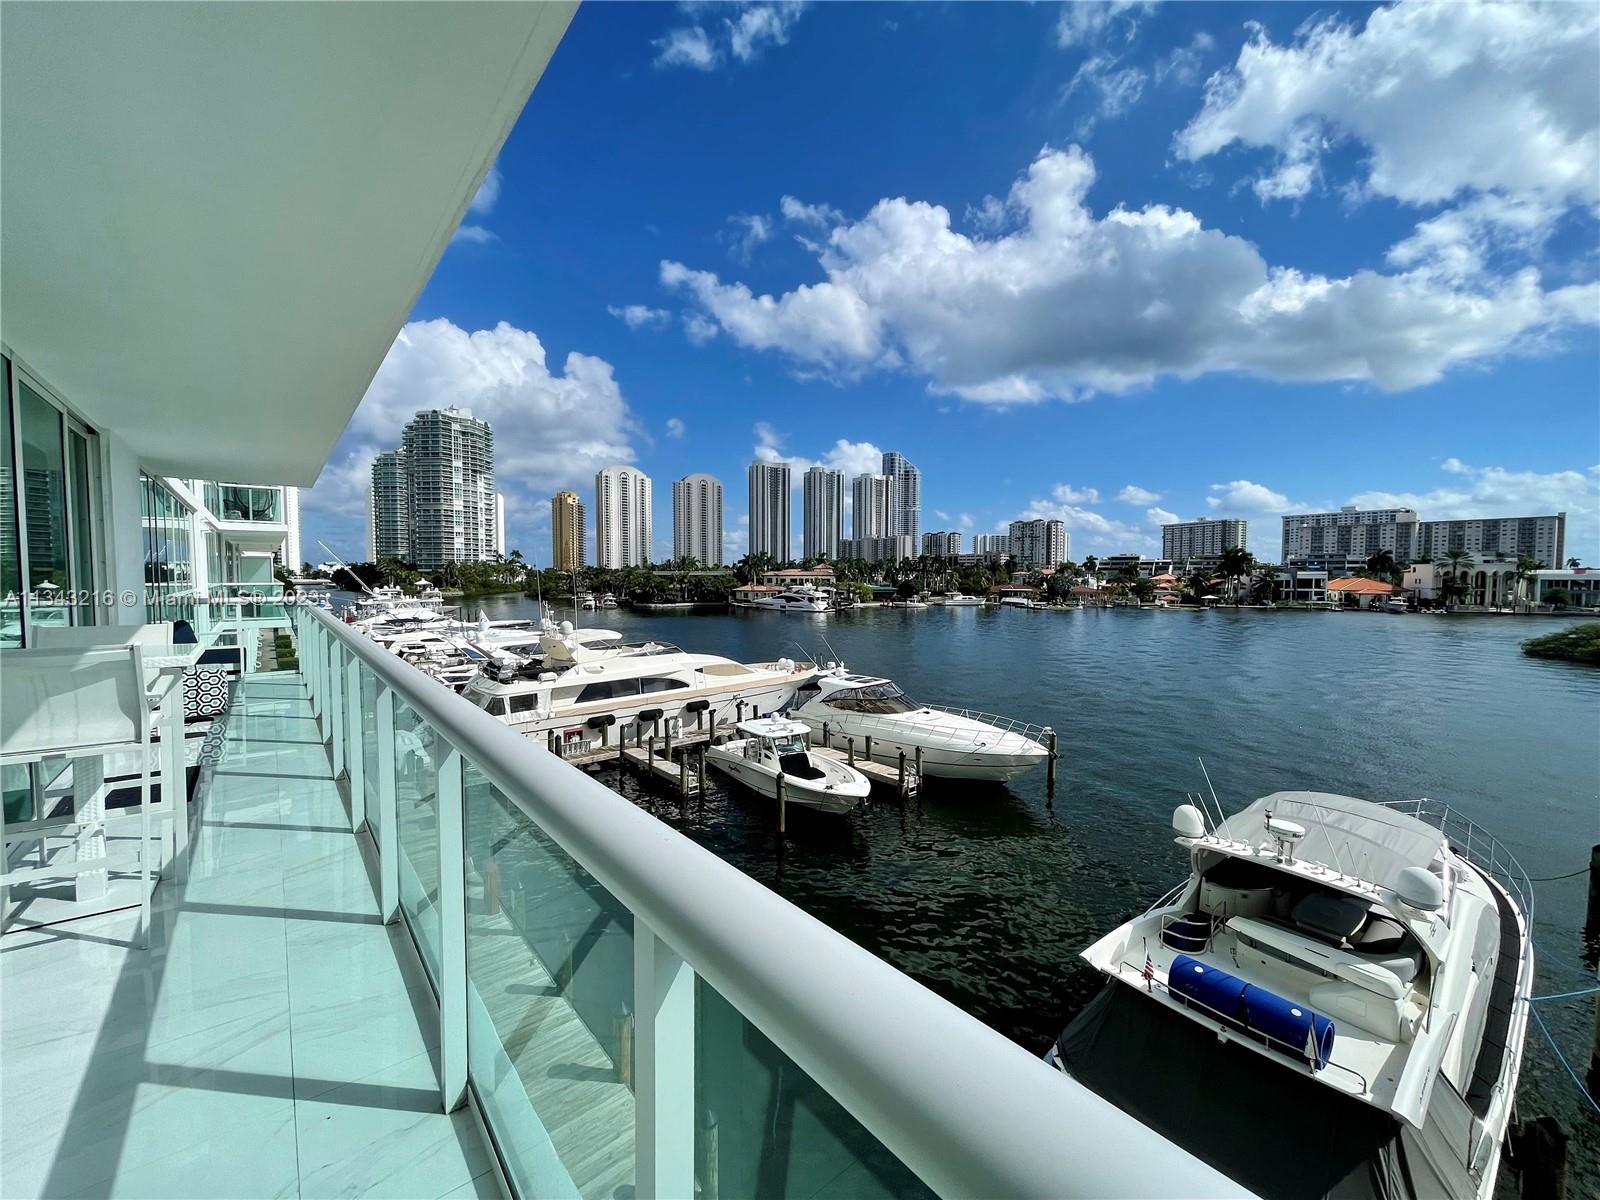 GREAT OPPORTUNITY to rent this fabulous 3 BD/2.5 Bath fully furnished unit in the luxurious 400 Sunny Isles! Unobstructed Intracoastal, Ocean and City views, custom closets, window treatments, high tech eco-friendly kitchen with premium European appliances and 1 parking spot on the same floor. 400 Sunny Isles offers resort style amenities such as a rooftop pool & cabanas overlooking the intercoastal, gym, sauna, steam room, tennis court, valet parking, bike storage and more. Just blocks to the beach, houses of worship, parks, and restaurants. Also available for seasonal rental.